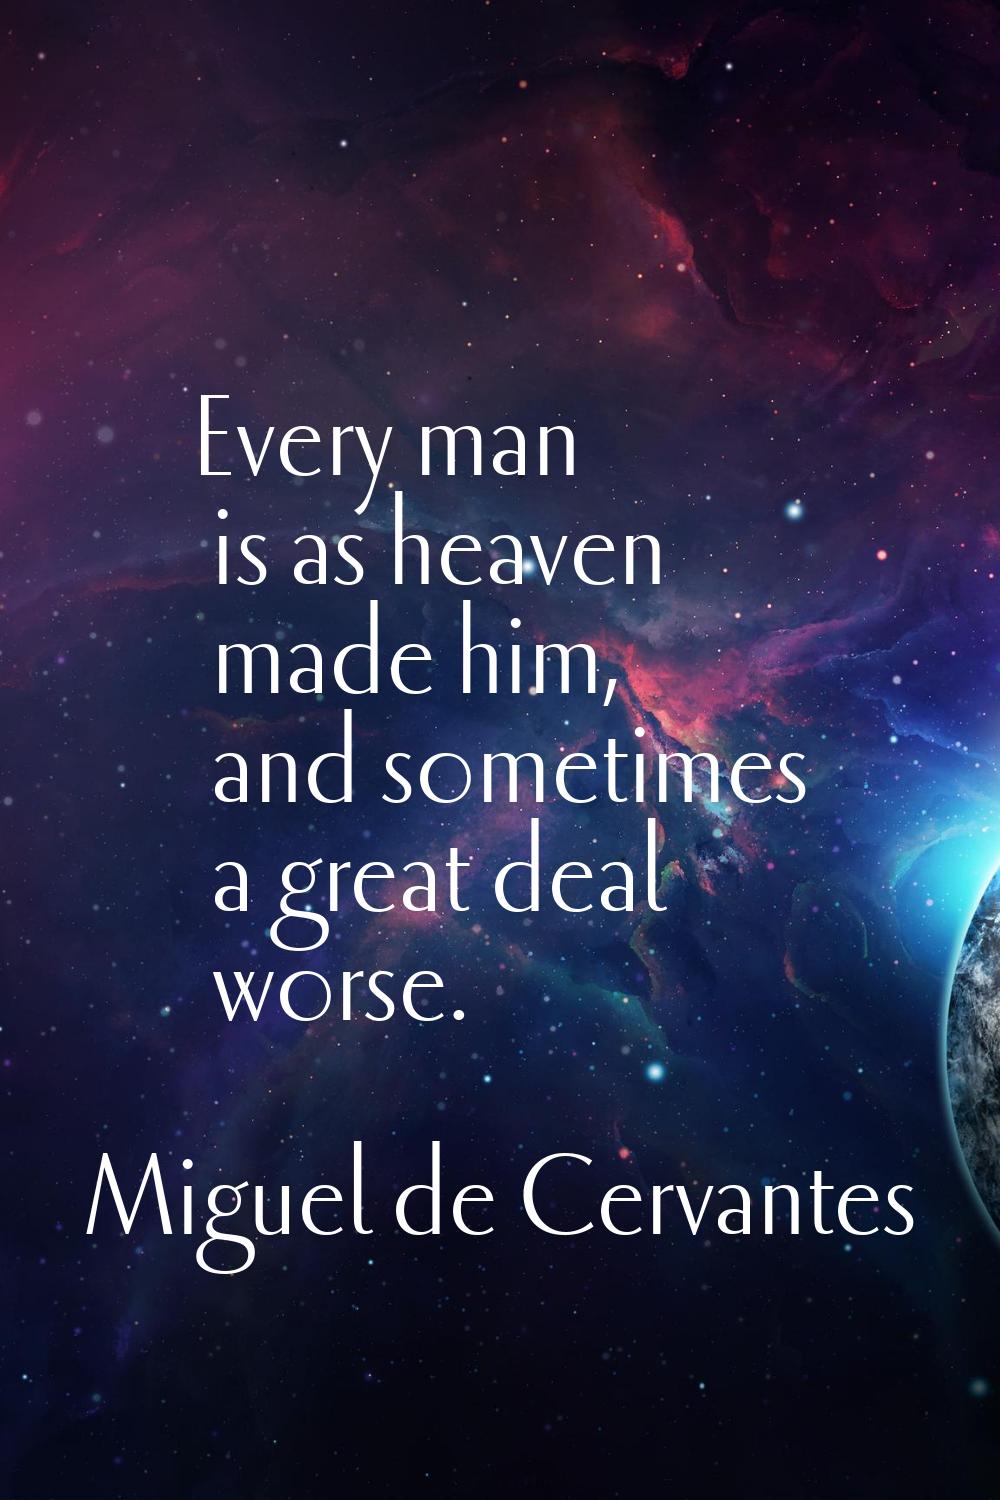 Every man is as heaven made him, and sometimes a great deal worse.